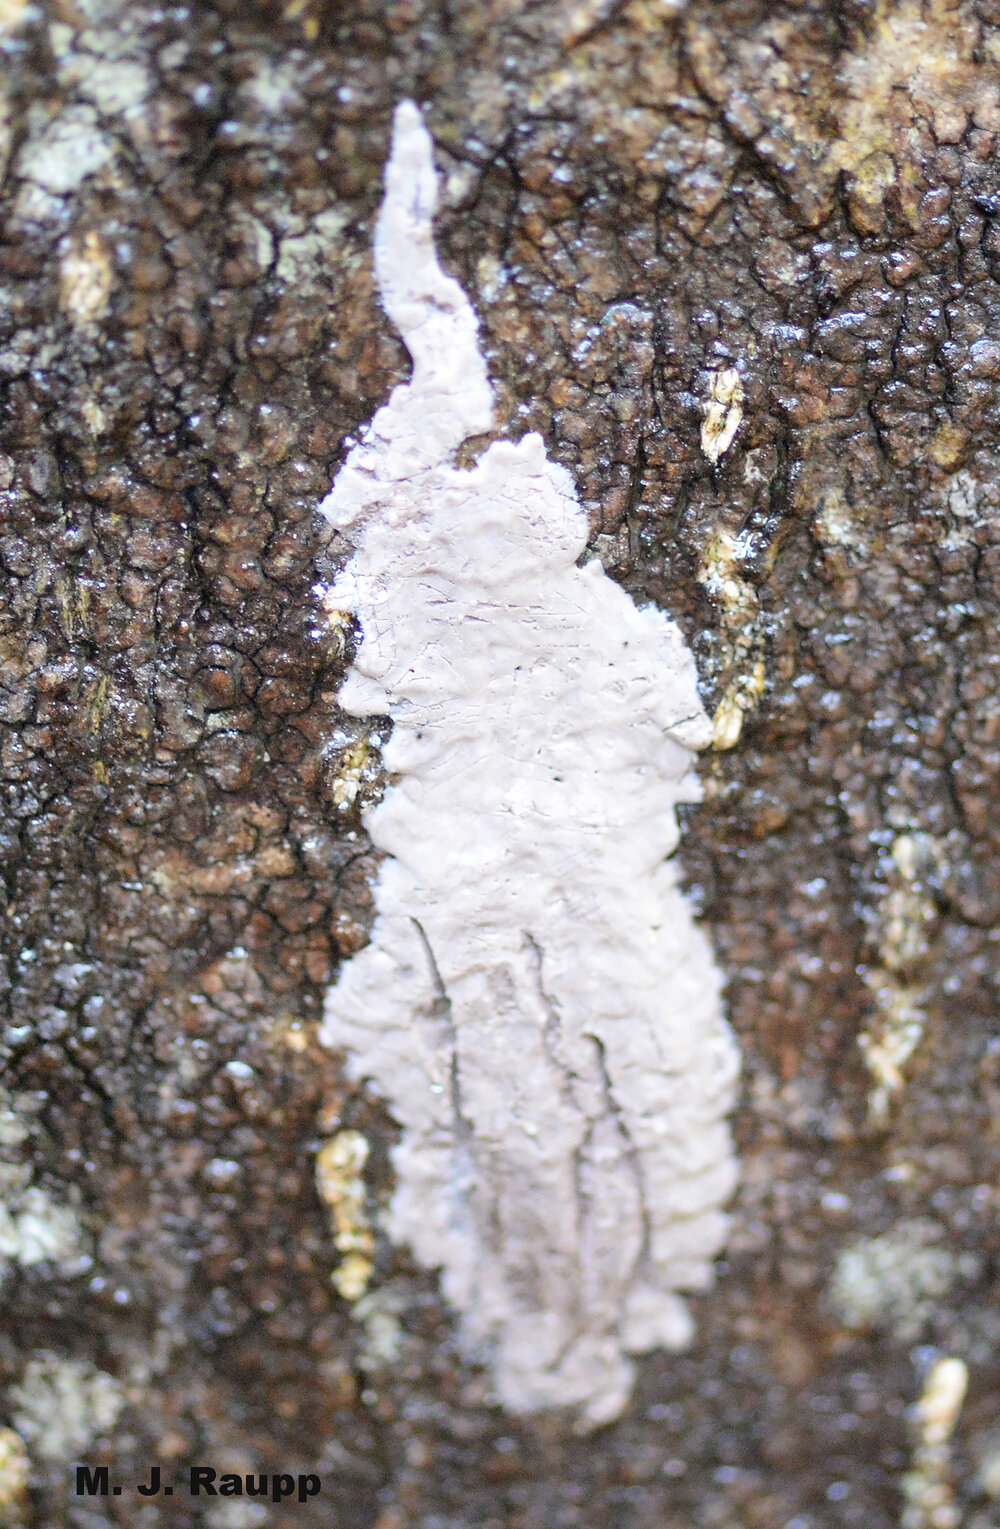 Spotted lanternfly egg masses are rather nondescript and often deposited in natural and human-made objects including masonry products, lawn furniture, pallets, and vehicles including automobiles and railroad cars. Movement of eggs is thought to be a major component of the long distance spread of spotted lanternflies.